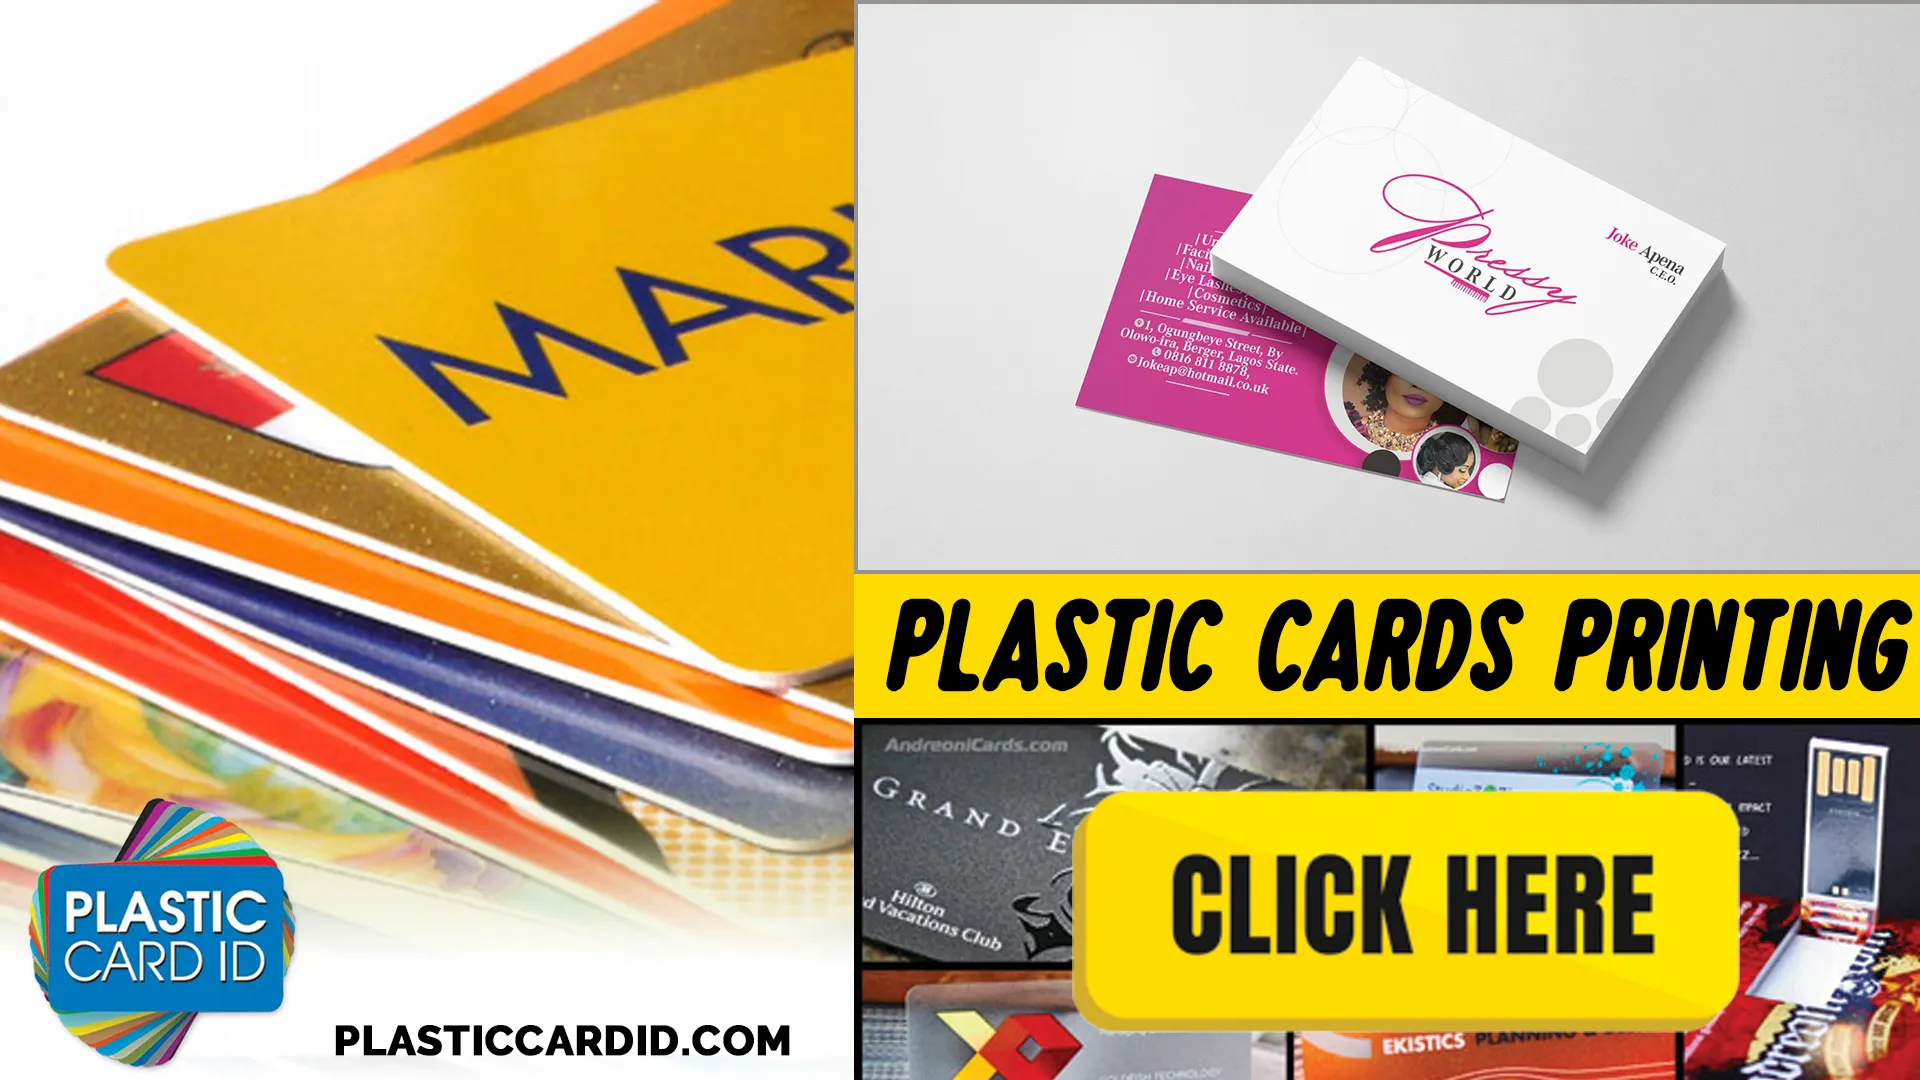 Our Plastic Card Products and Services